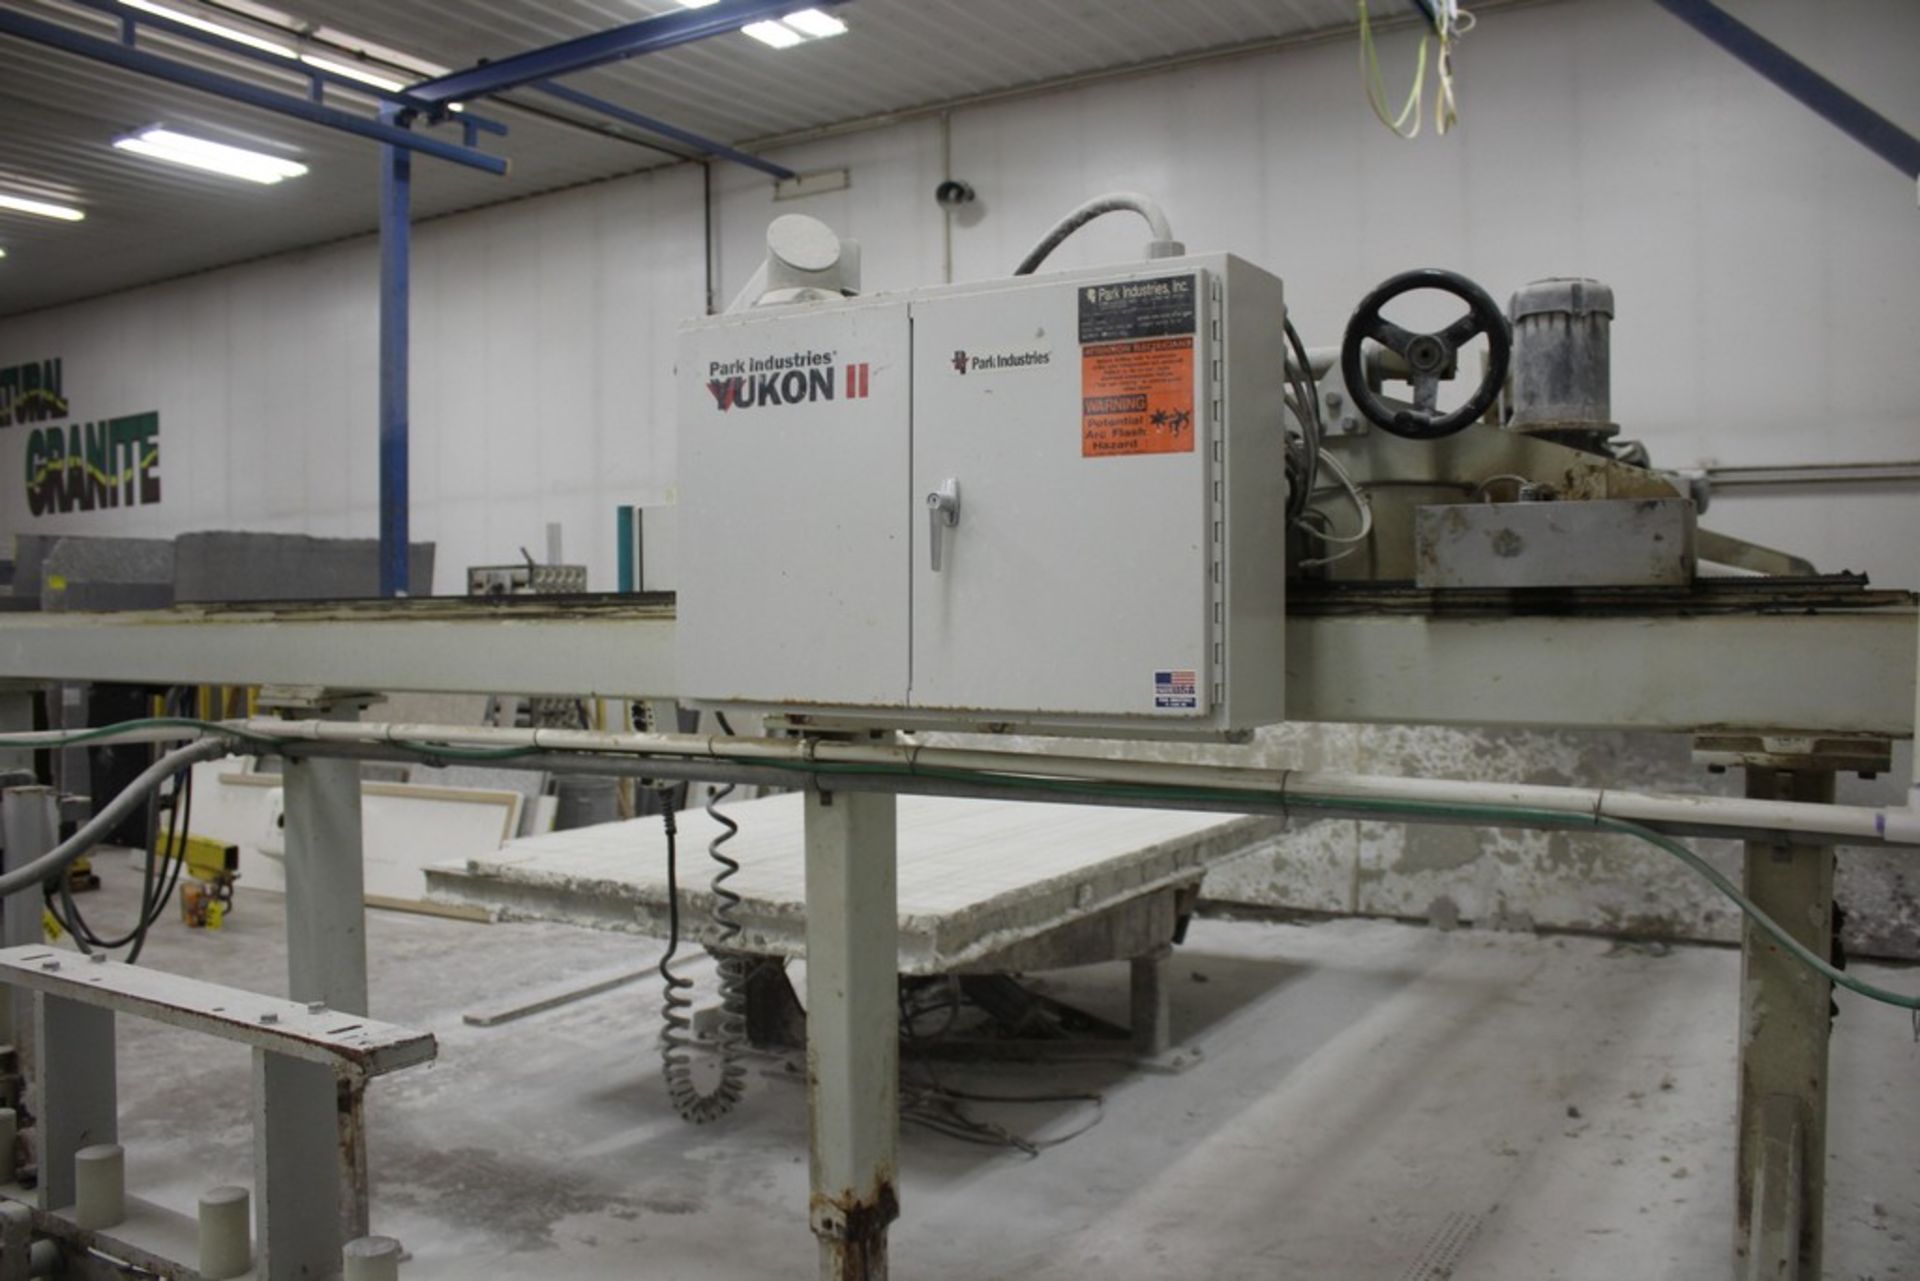 PARK INDUSTRIES MODEL YUKON II BRIDGE SAW WITH ROTATING TABLE (11' X 6' X 33" H) WITH SIEMENS - Image 23 of 36